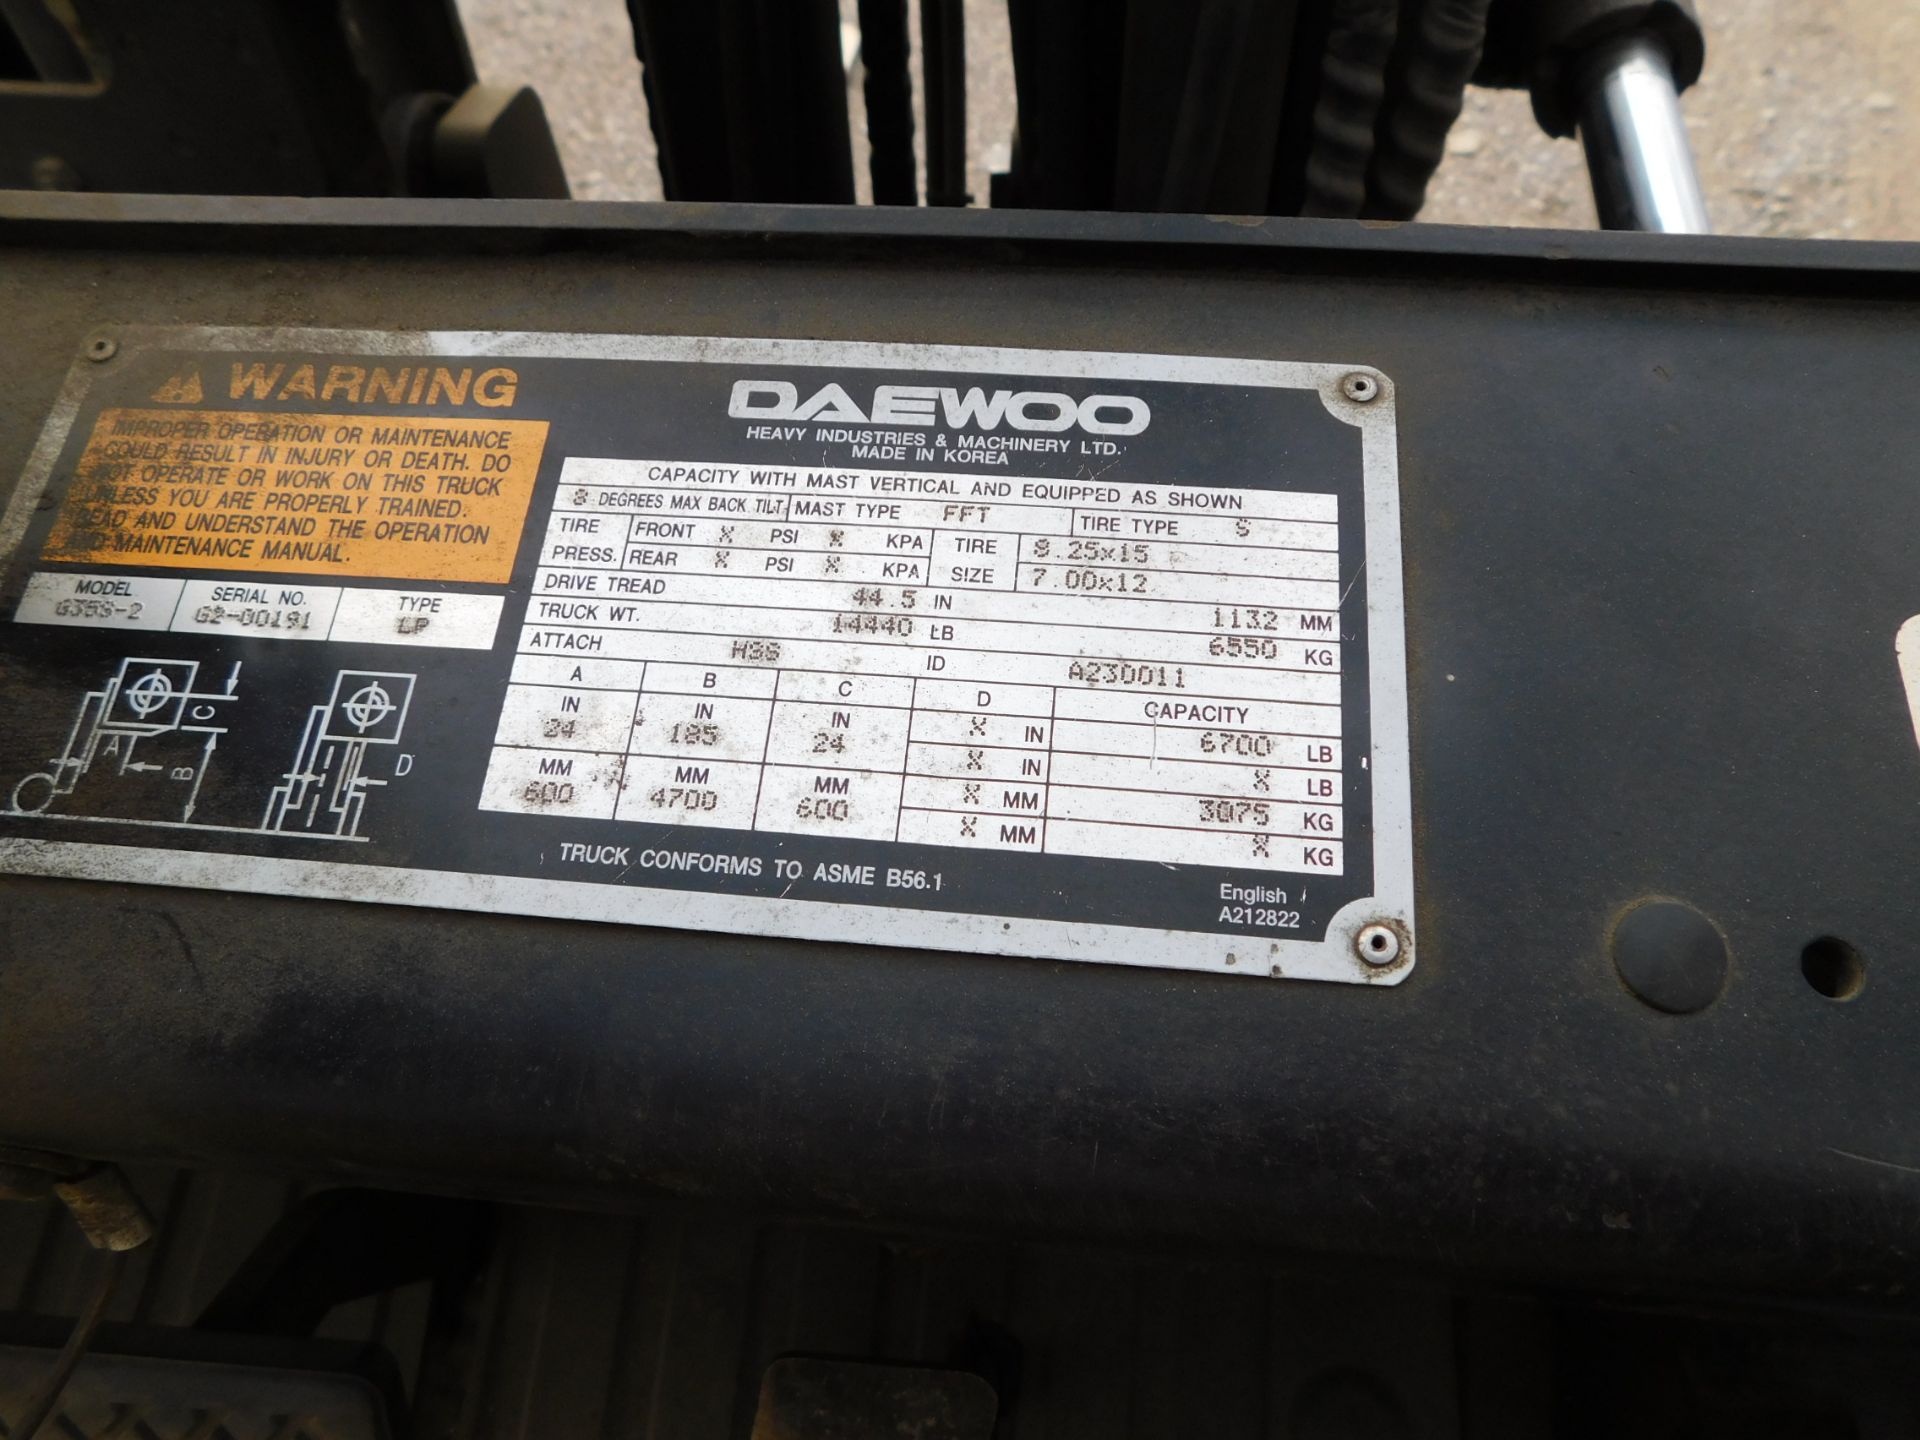 Daewoo Model G35S-2 Forklift, SN G2-00191, 6,700 lb. cap., LP, Solid Pneumatic Non-Marking Tires, - Image 20 of 20